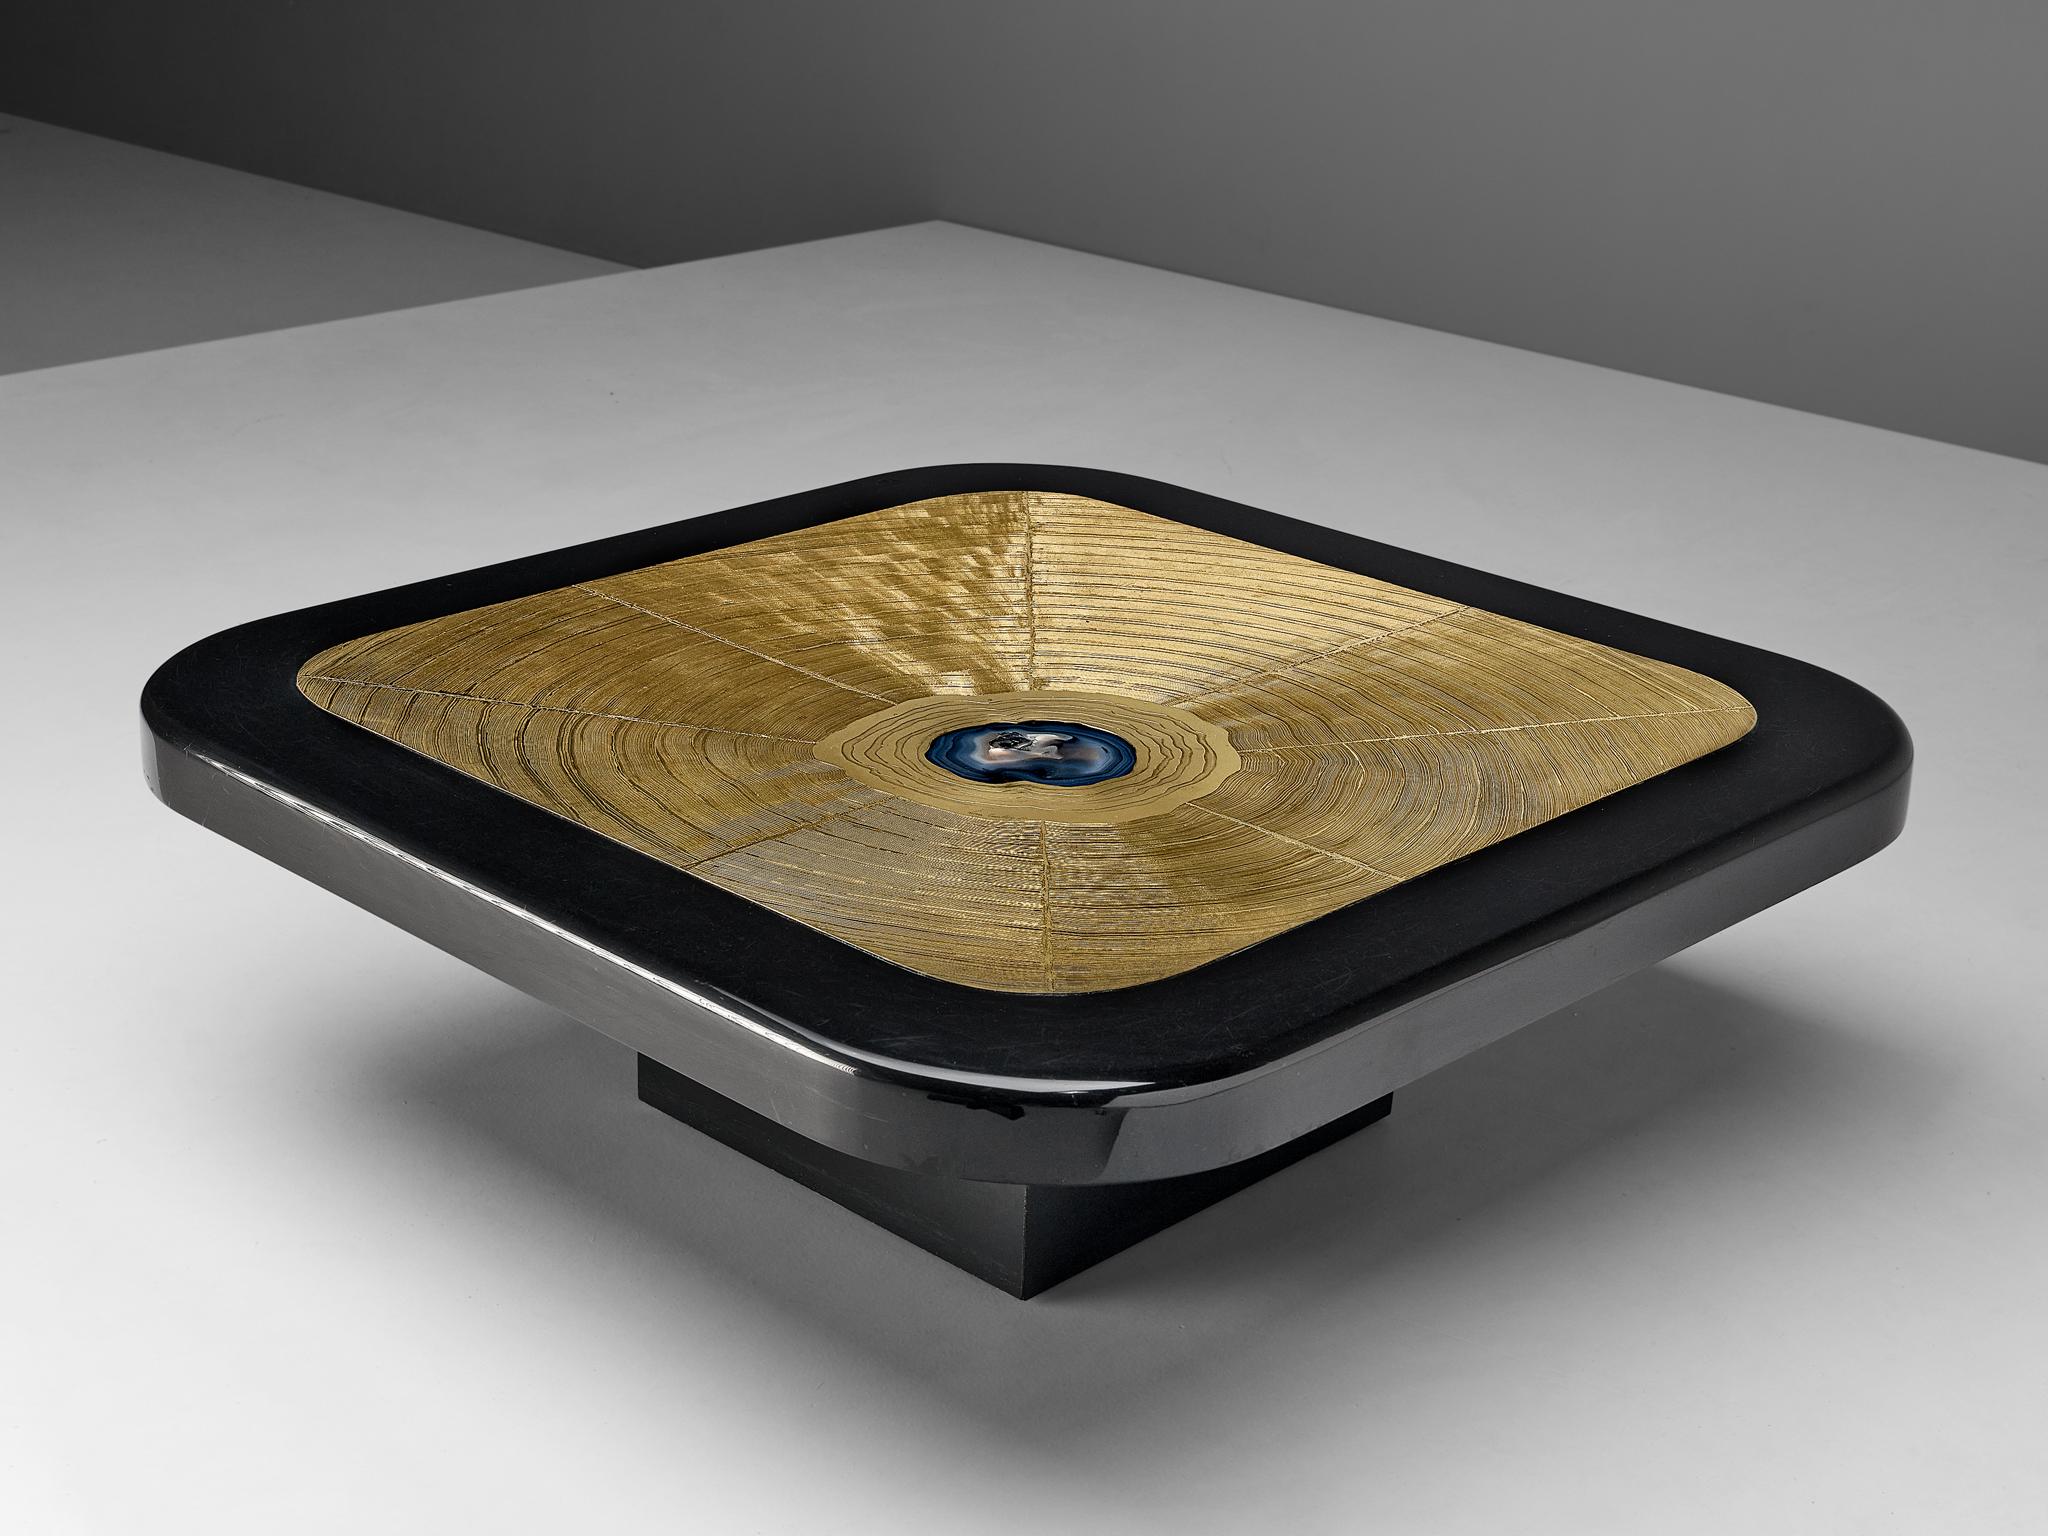 Belgian Lova Creation Etched Brass Coffee Table with Agate Stone Inlay